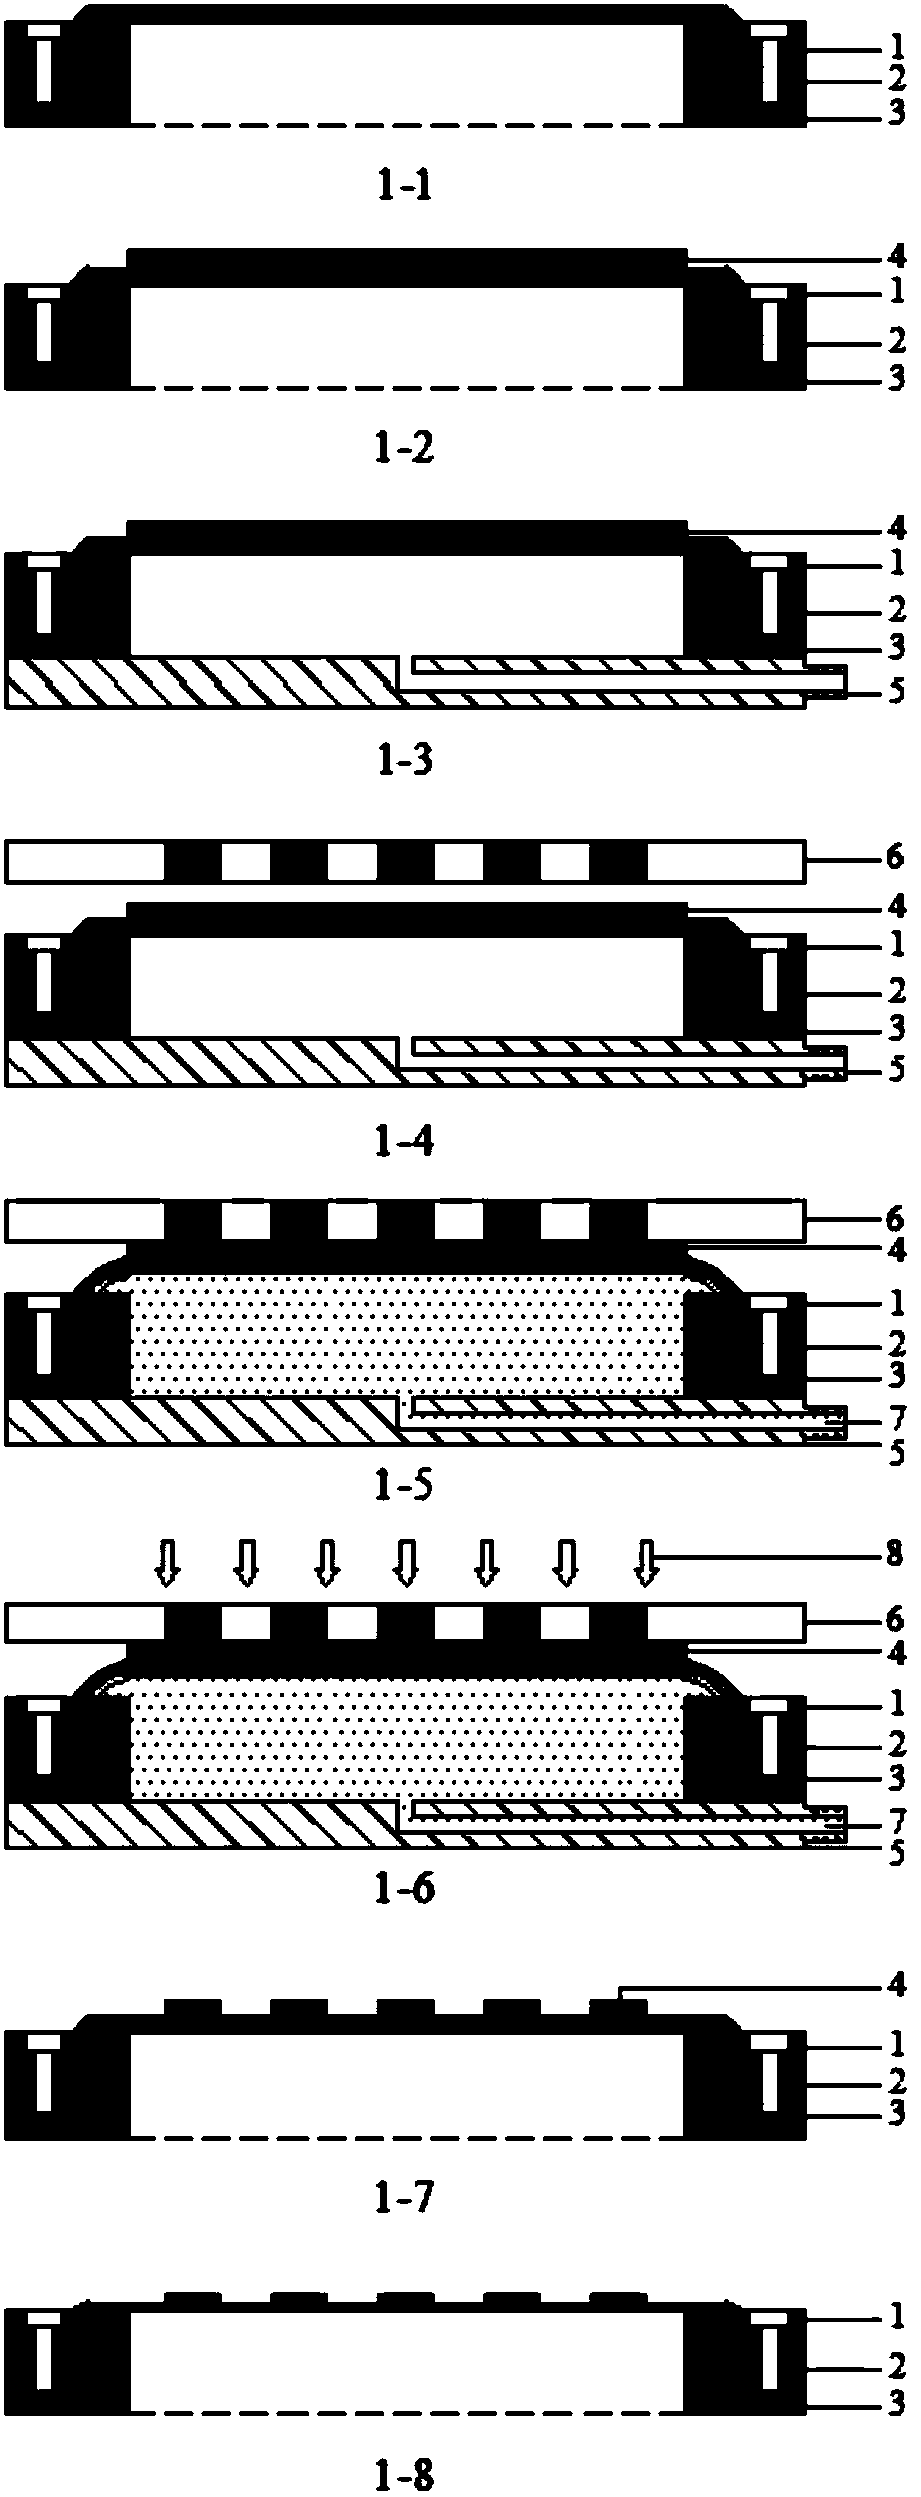 Inflatable thin film method for preparing micro-nano structure of flexible thin film substrate